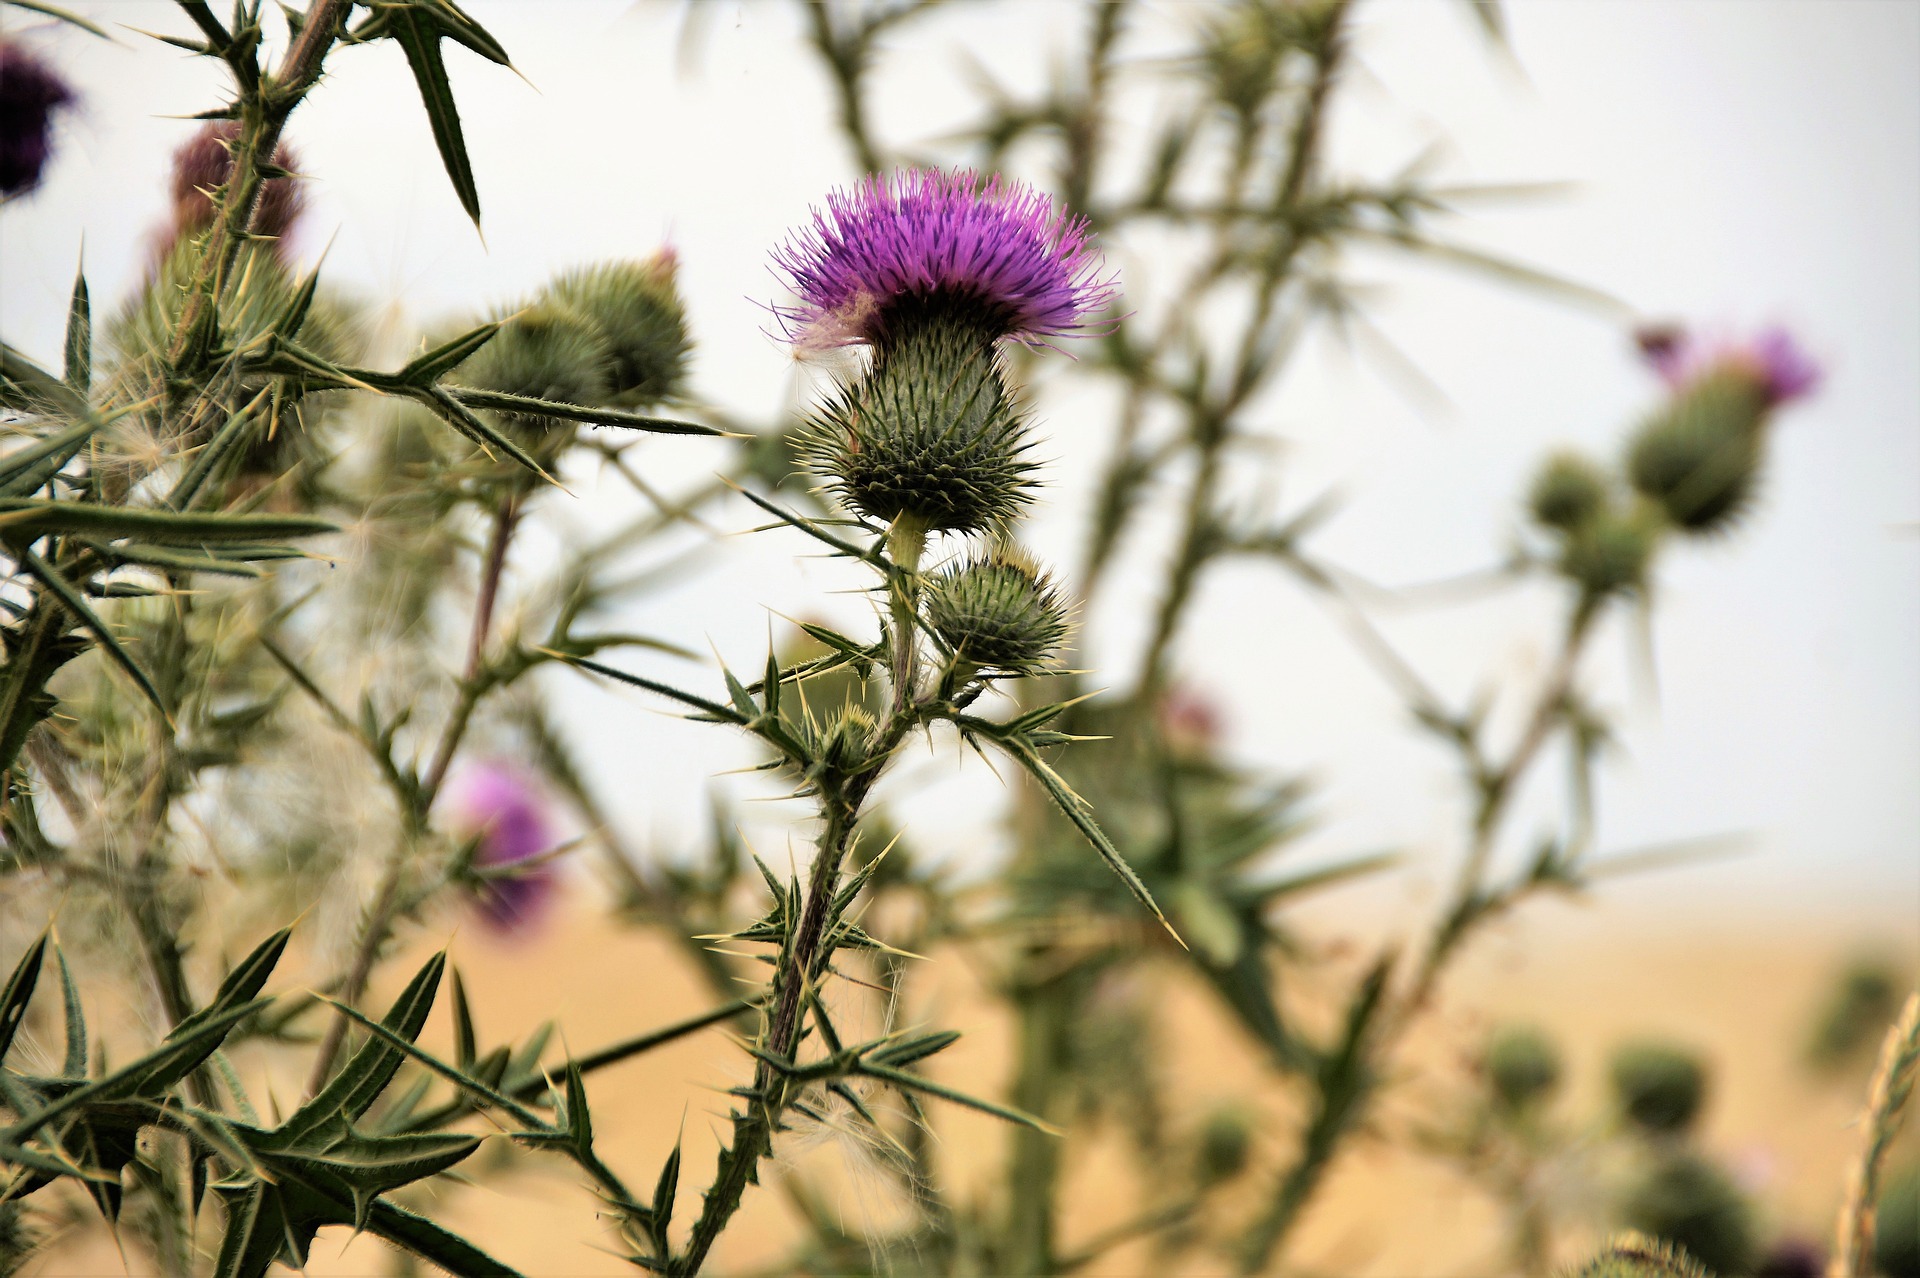 Thistles growing in a field